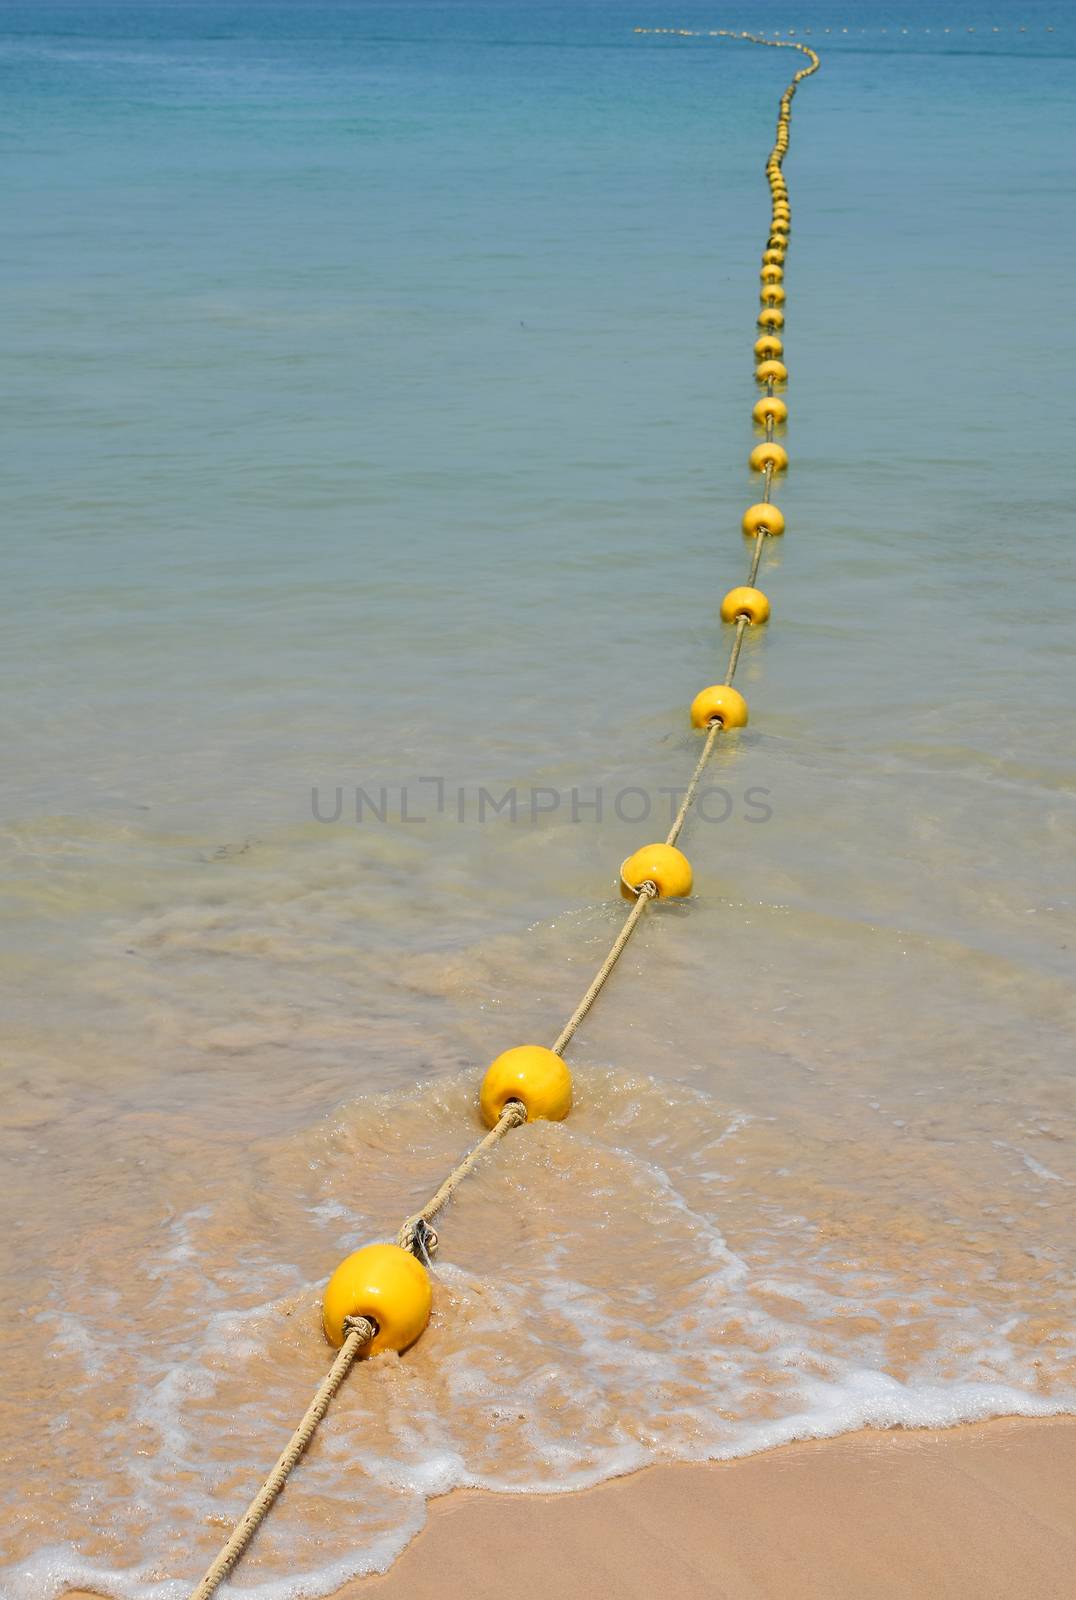 Chain of yellow polystyrene sea marker buoys with cable tow at sand beach and in blue sea water, perspective